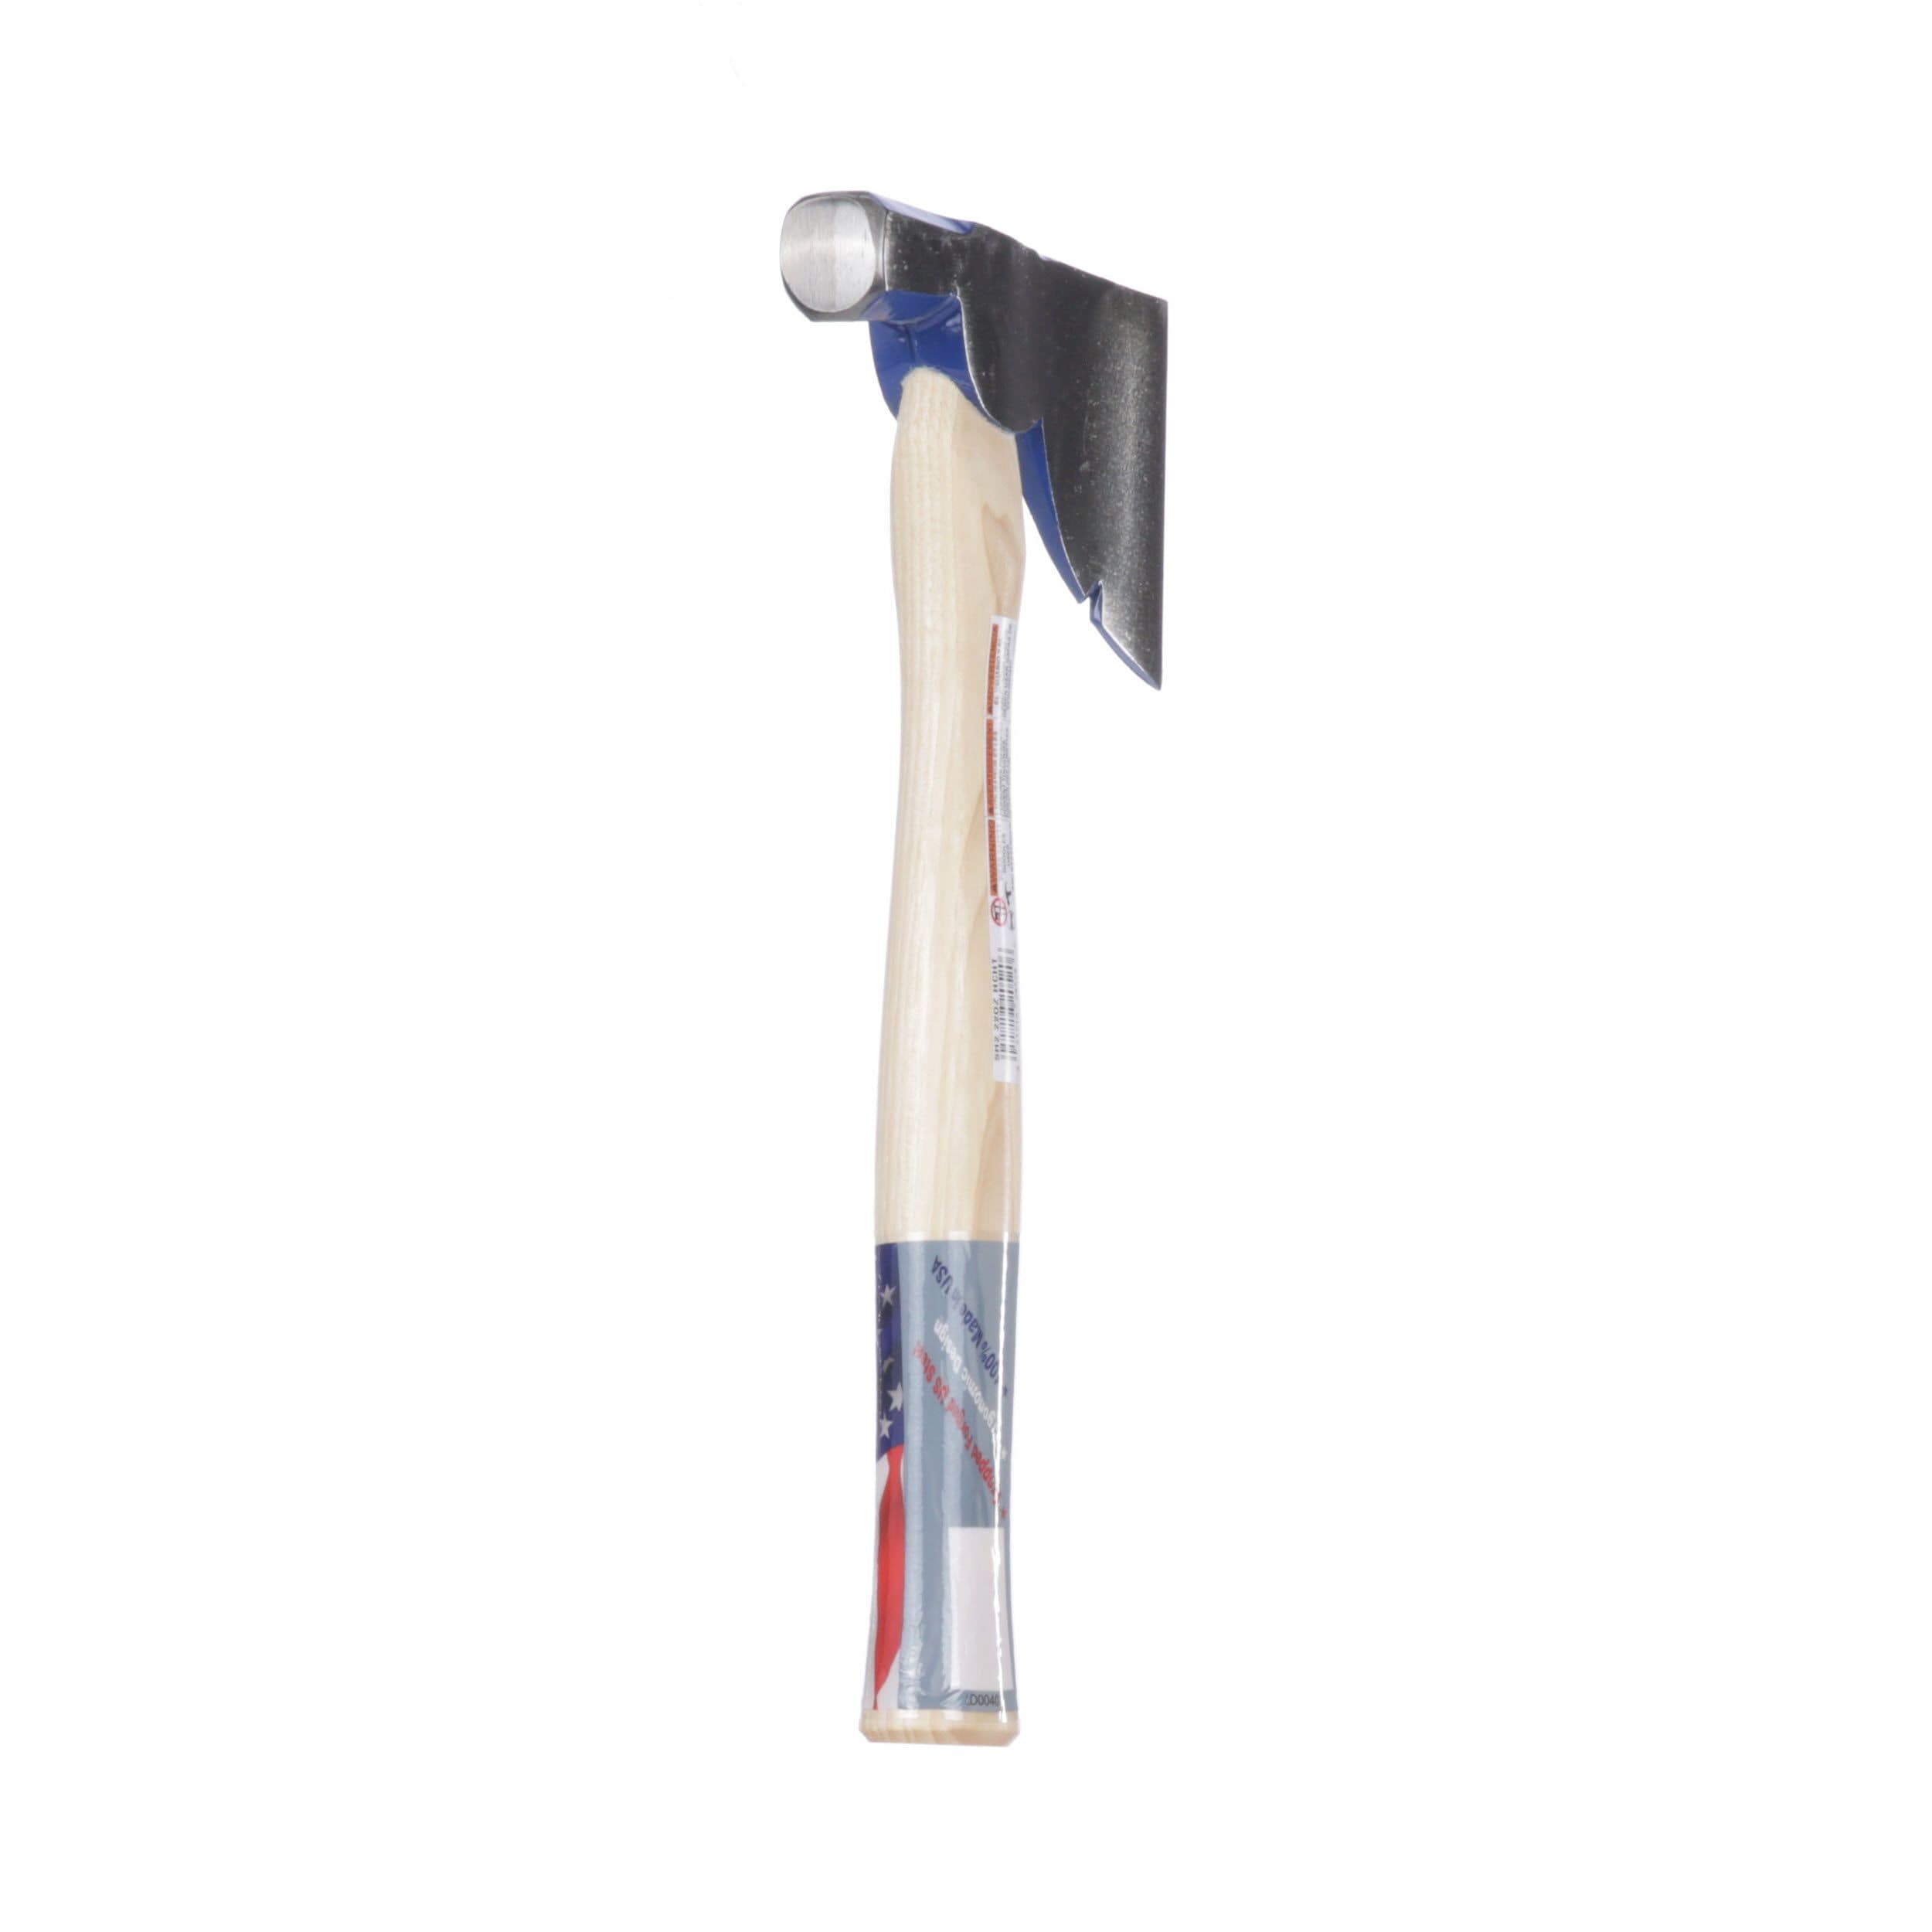 Vaughan SH2 22-Ounce Carpenters Half Hatchet 13-Inch Long. Flame Treated Hickory Handle 